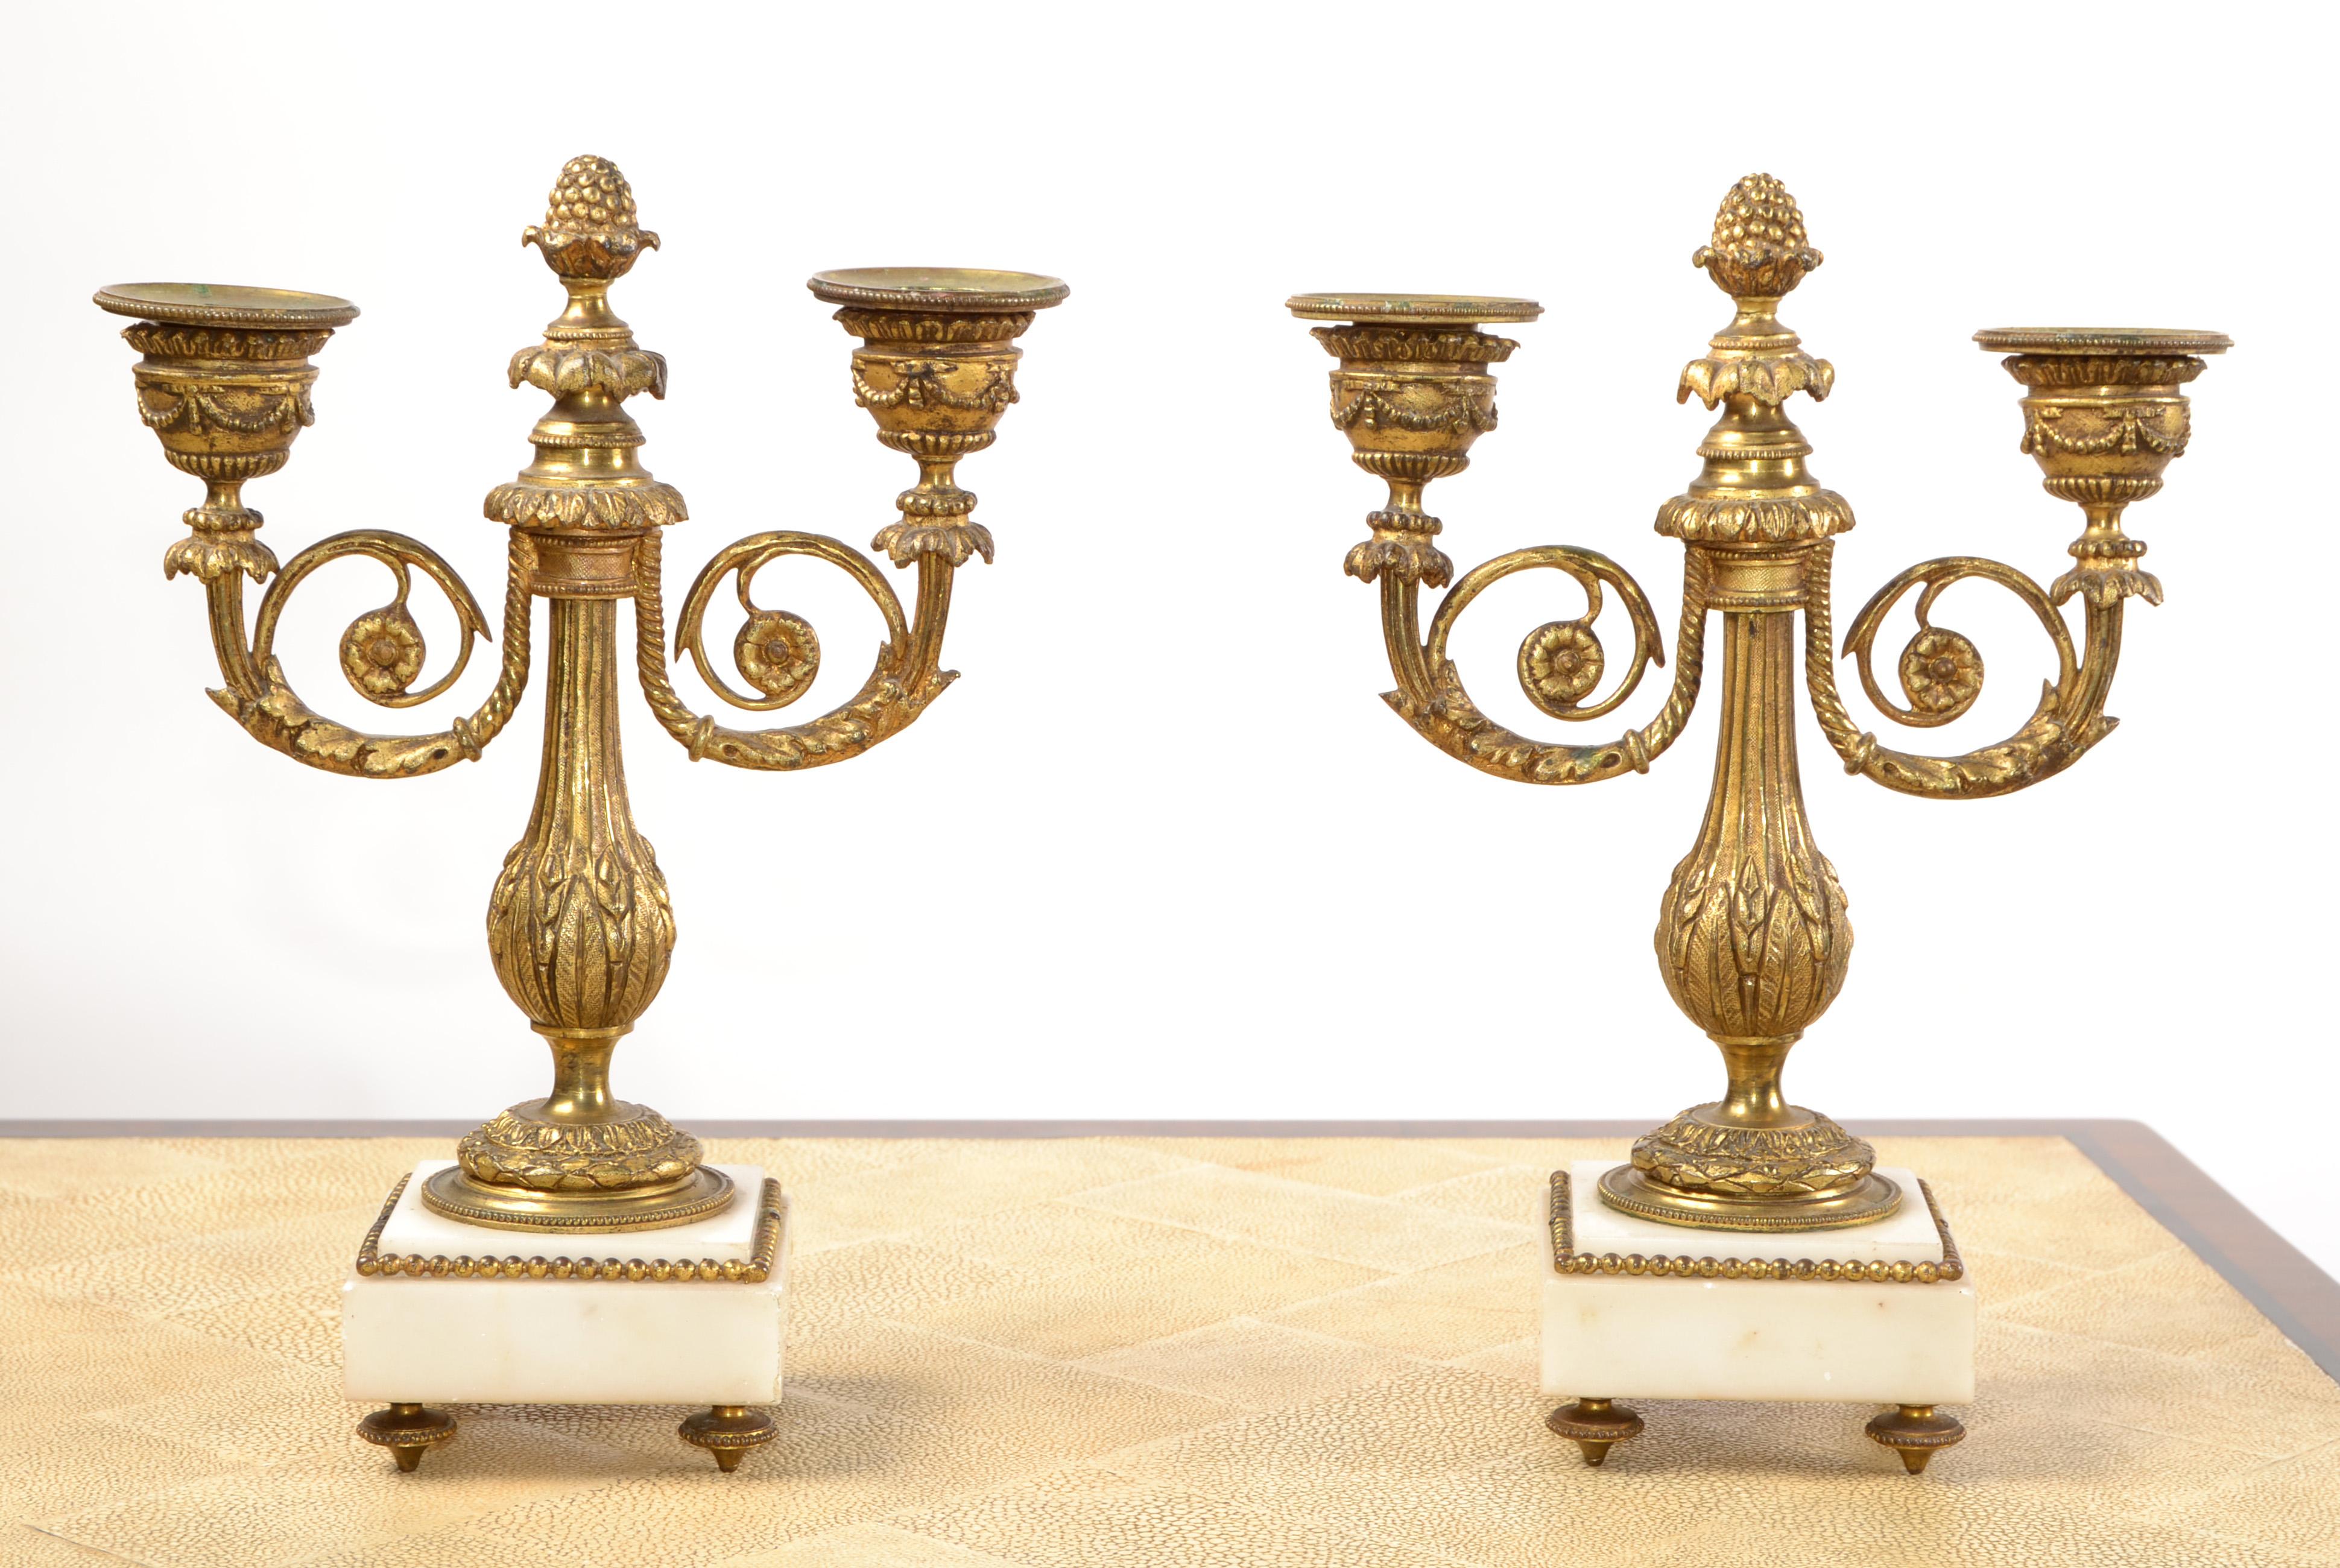 A pair of heavy Napoleon III Gilt Bronze and white Marble candleholders or candelabras.
Tarnished due to age and use some minor chips to the white Marble.
Base measures: 3.38 x 3.38 inches.